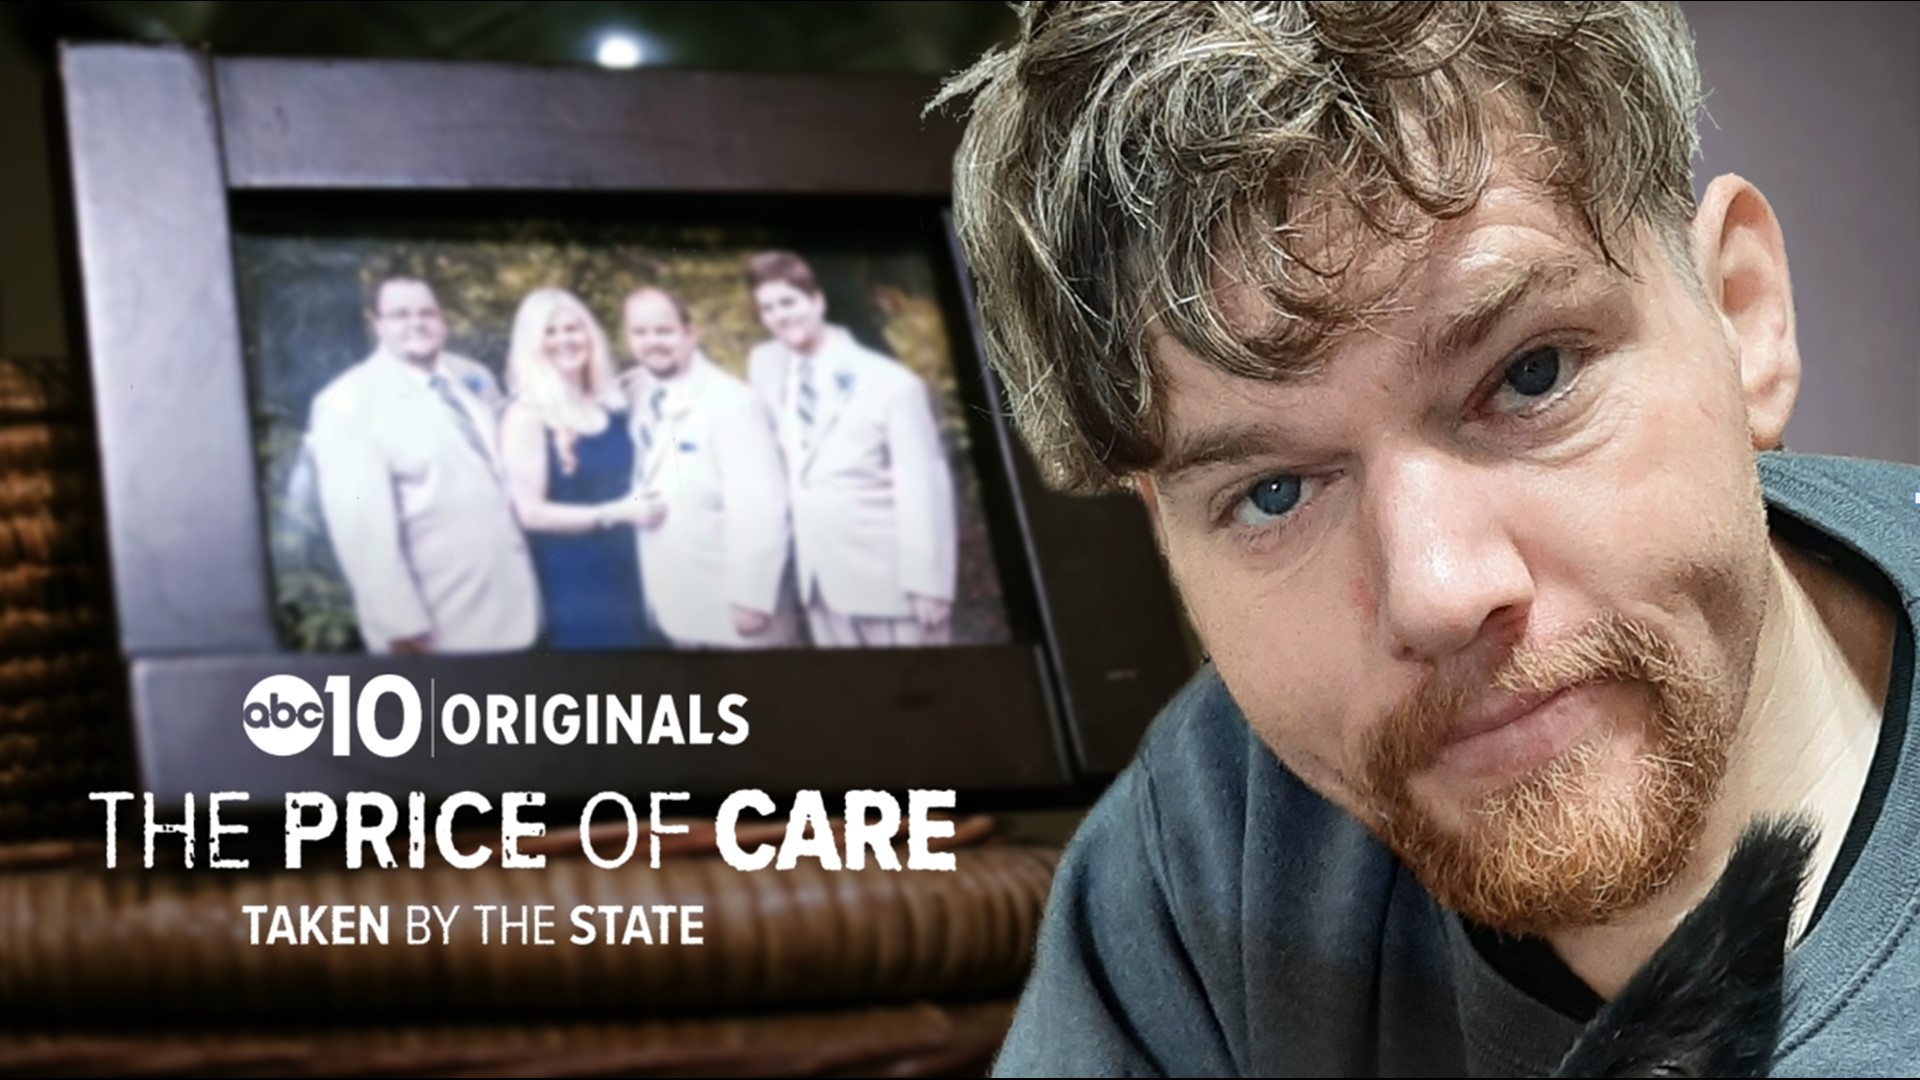 ABC10 Originals investigates conservatorships and the state agency failing the people it has promised to protect: adults with developmental disabilities.